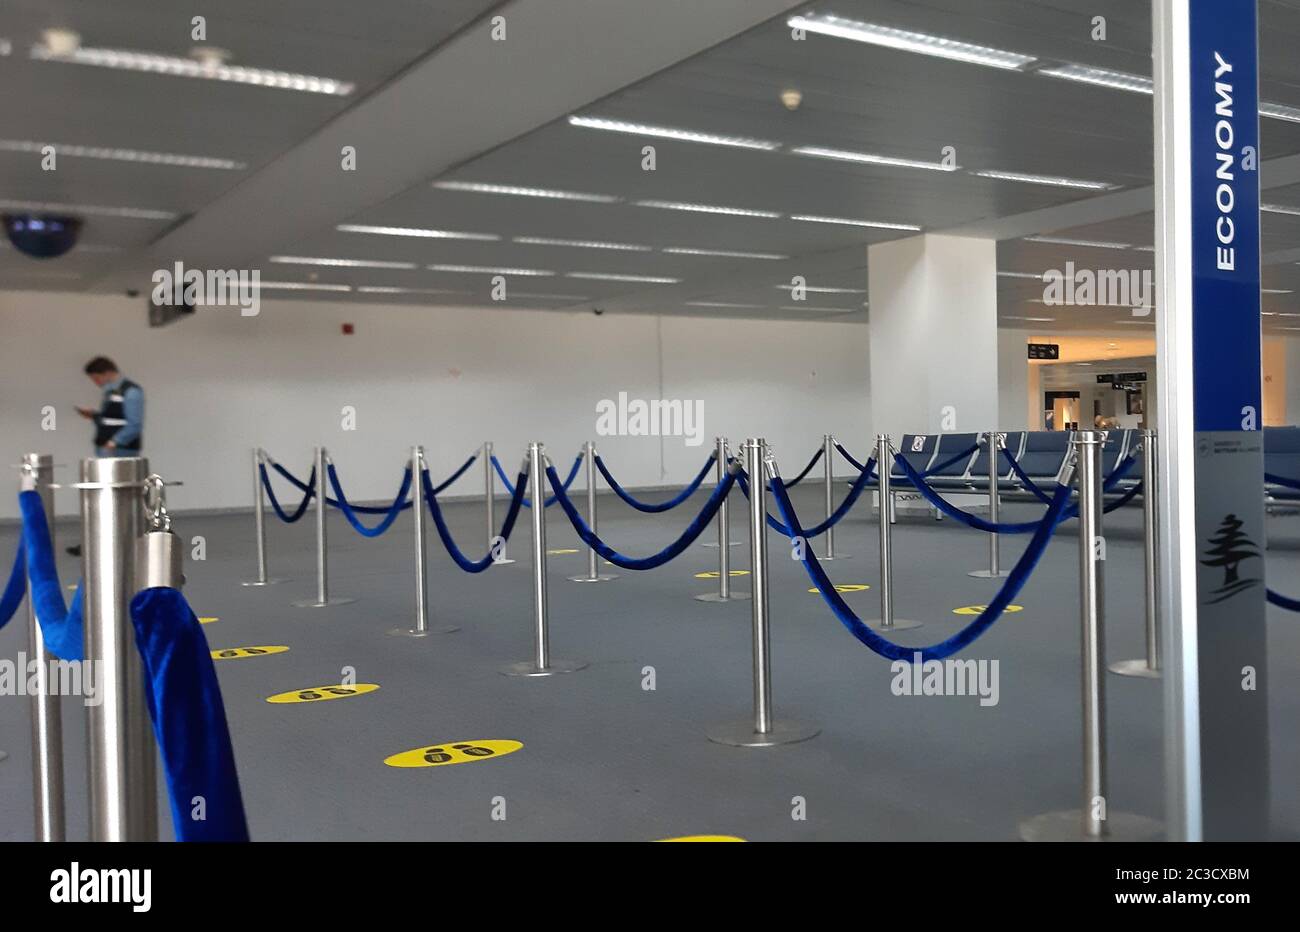 Beirut. 19th June, 2020. Photo taken on June 19, 2020 shows signs on the ground reminding people of social distancing at Beirut Rafic Hariri International Airport in Beirut, Lebanon. The airport is expected to reopen on July 1. Credit: Bilal Jawich/Xinhua/Alamy Live News Stock Photo